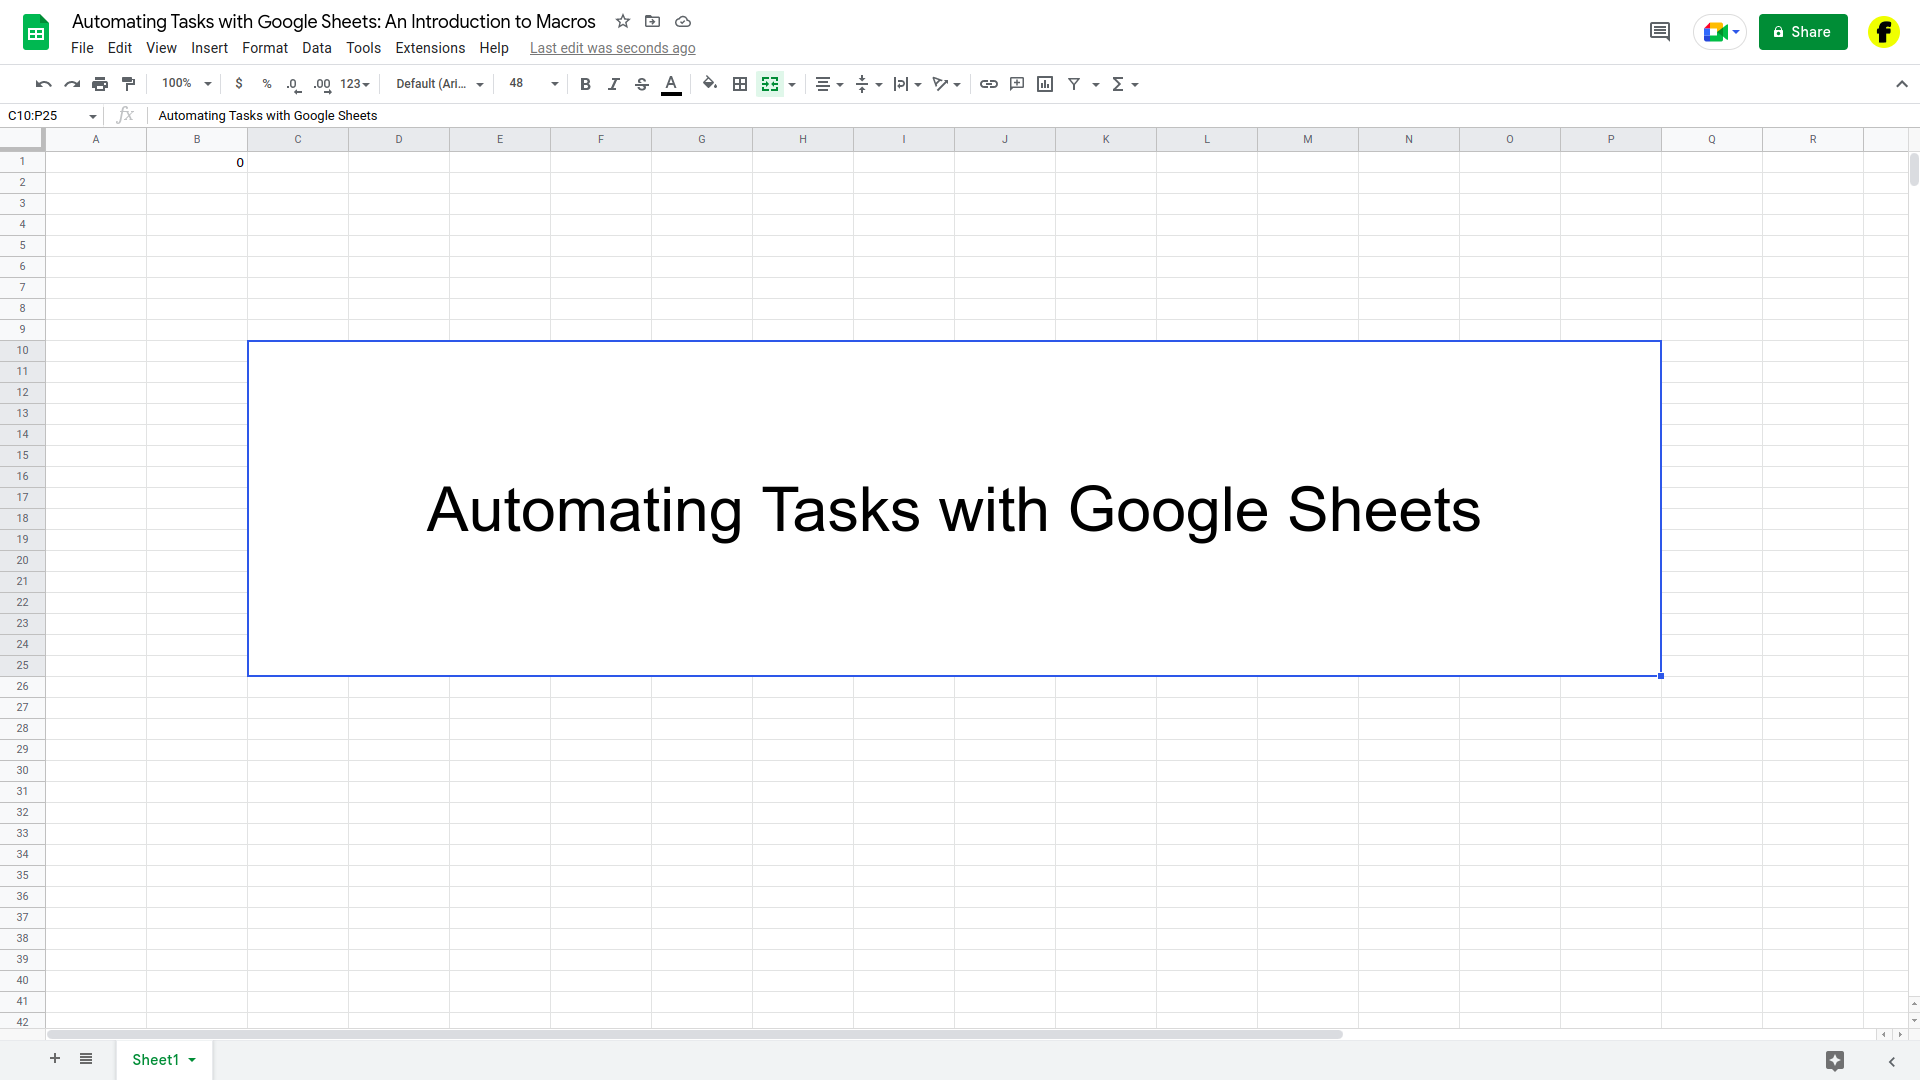 Automating Tasks with Google Sheets: An Introduction to Macros